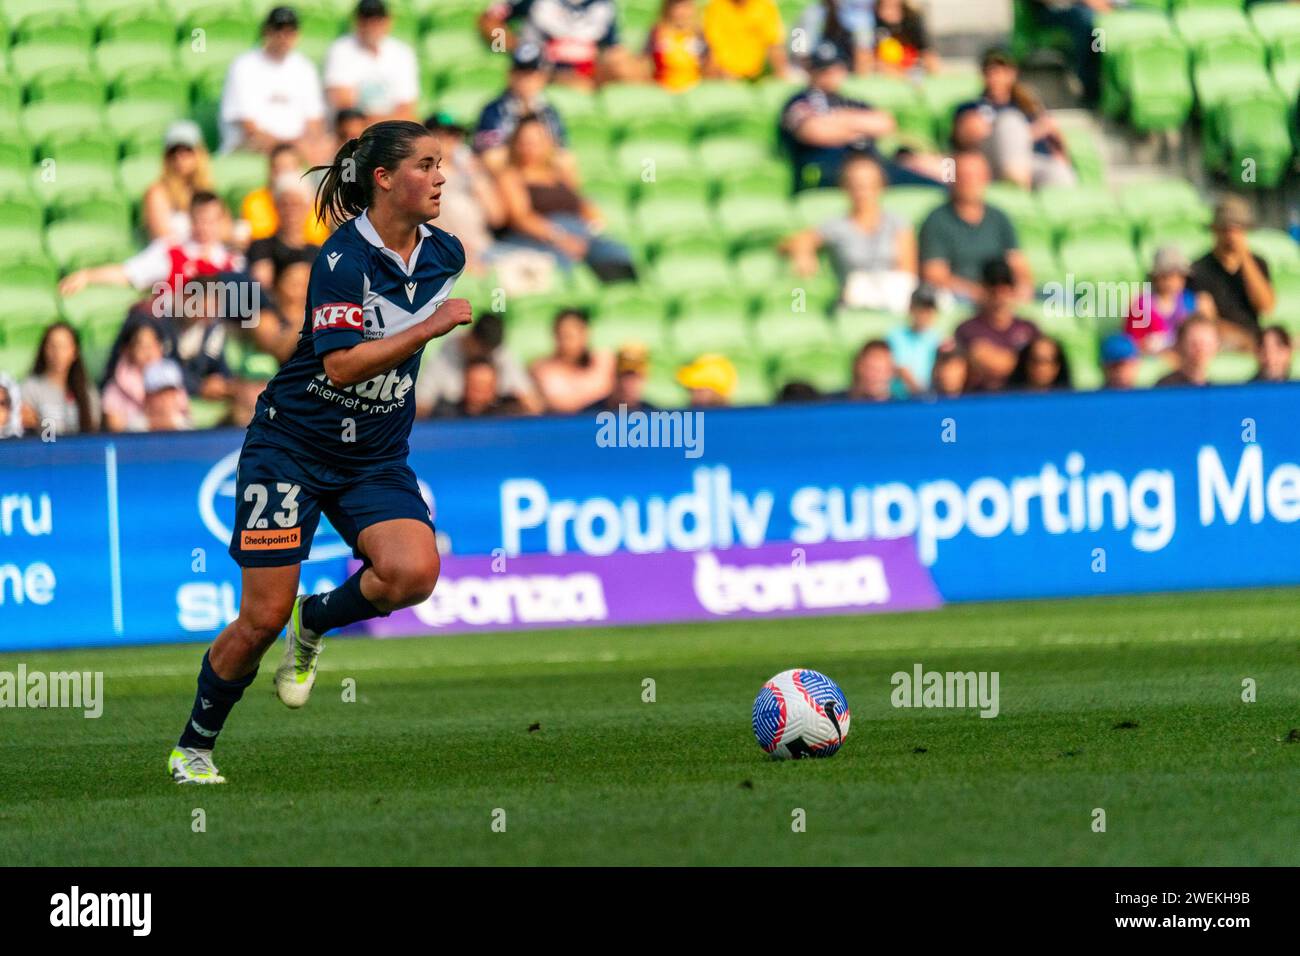 Melbourne, Australia. 26 January, 2024. Melbourne Victory FC Midfielder Rachel Lowe (#23) runs the ball across the field looking for a pass during the Liberty A-League Women’s match between Melbourne Victory FC and Sydney FC at AAMI Park in Melbourne, Australia. Credit: James Forrester/Alamy Live News Stock Photo